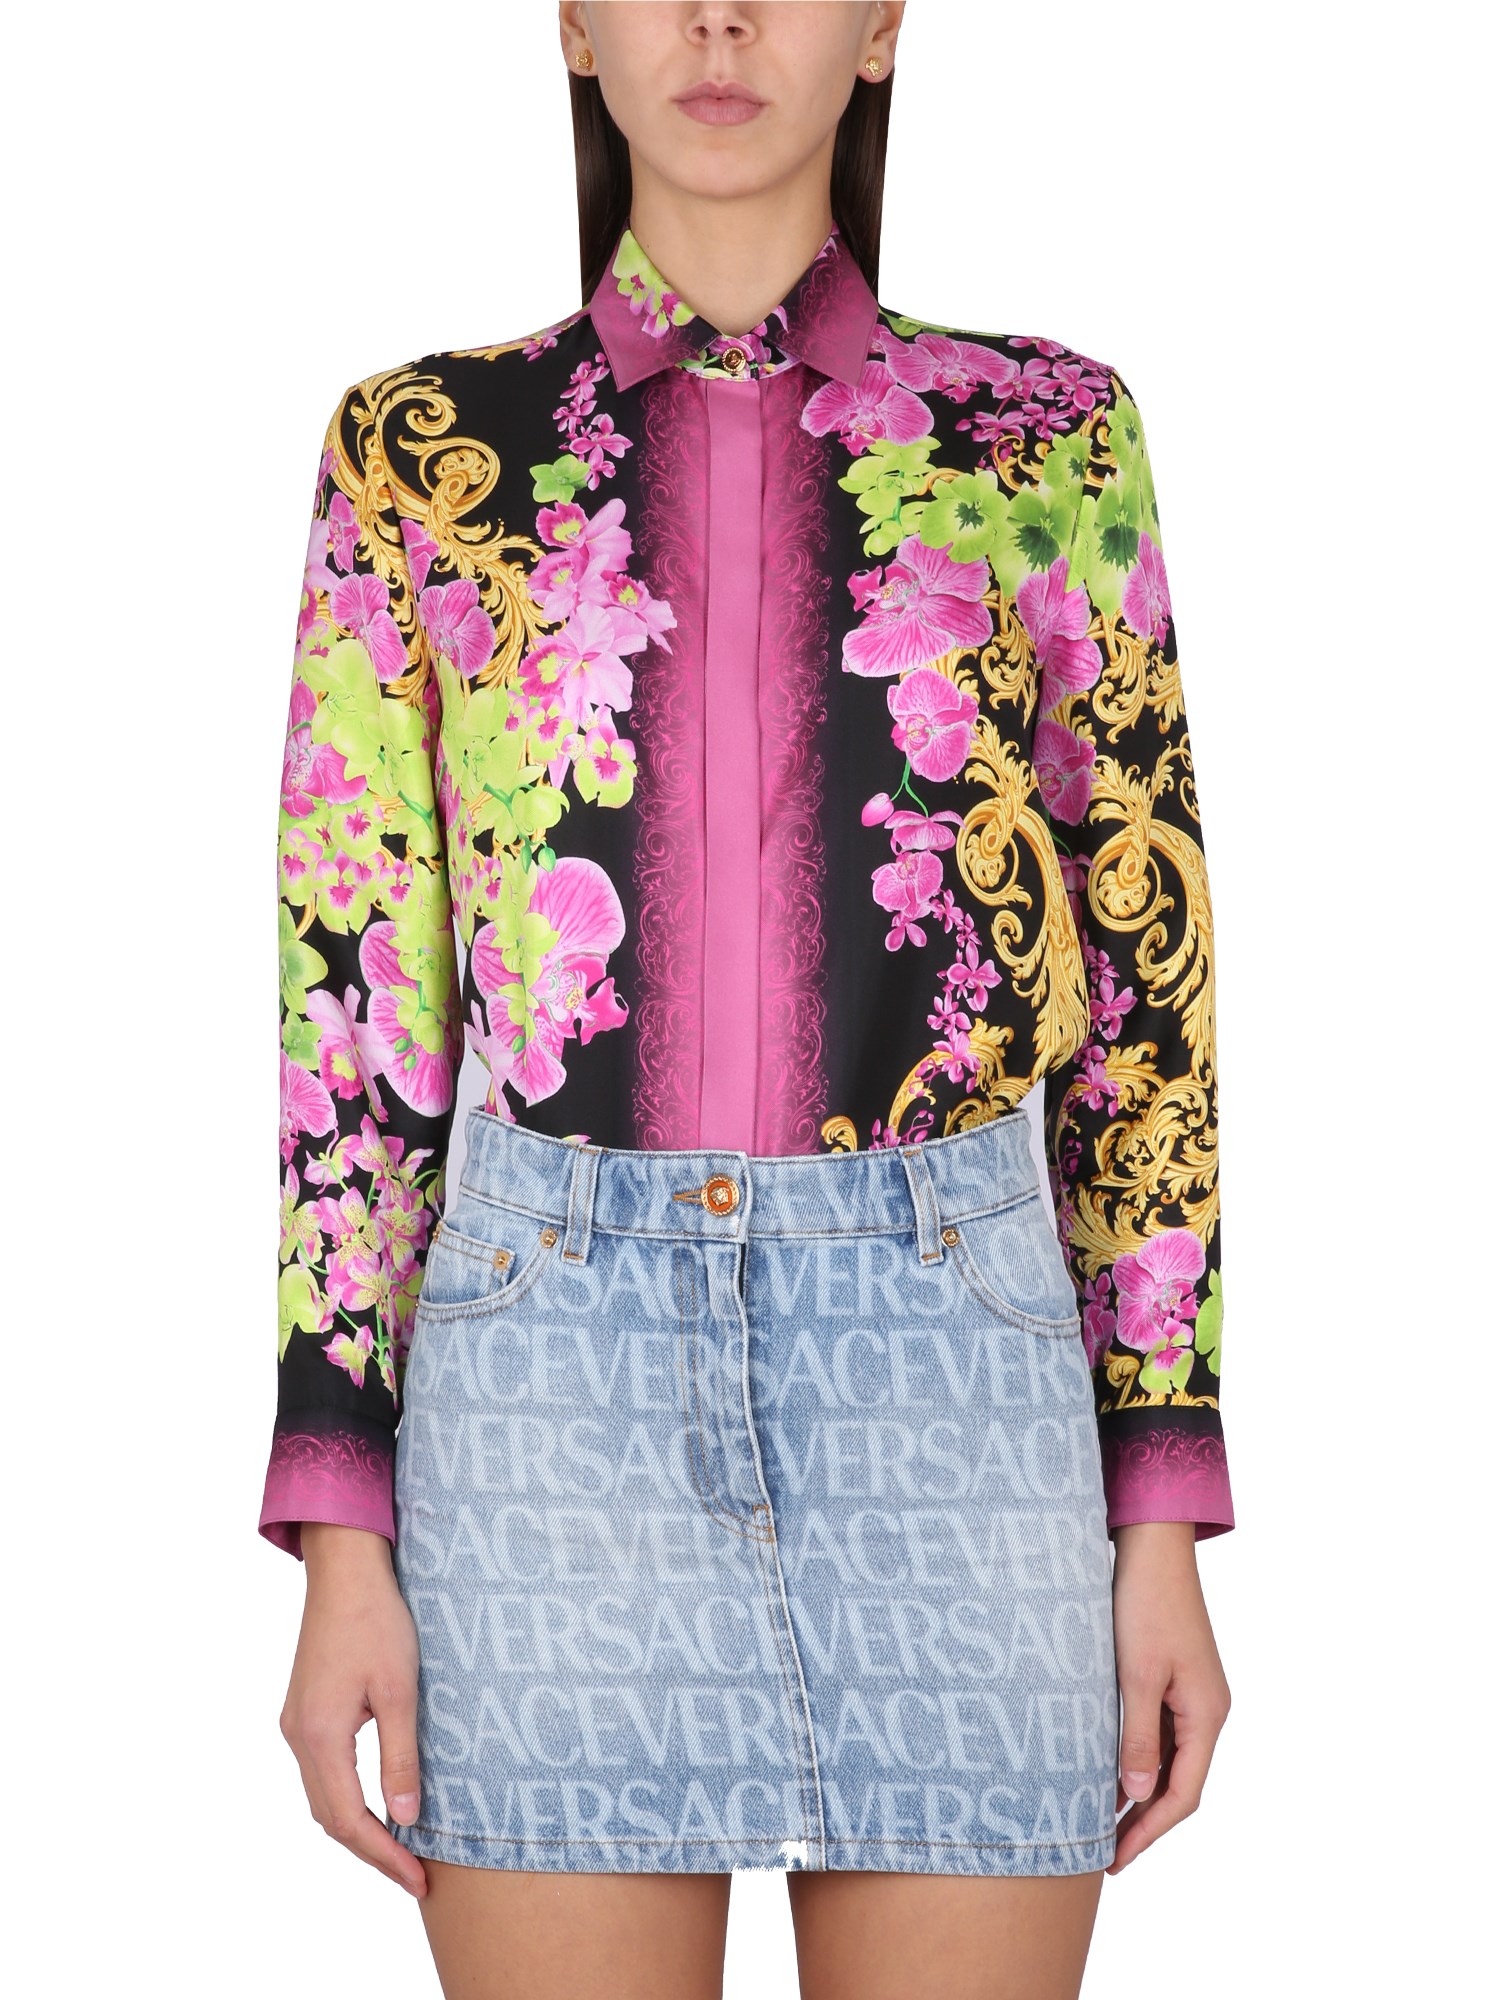 Versace Orchid Jellyfish Print Shirt In Multicolour